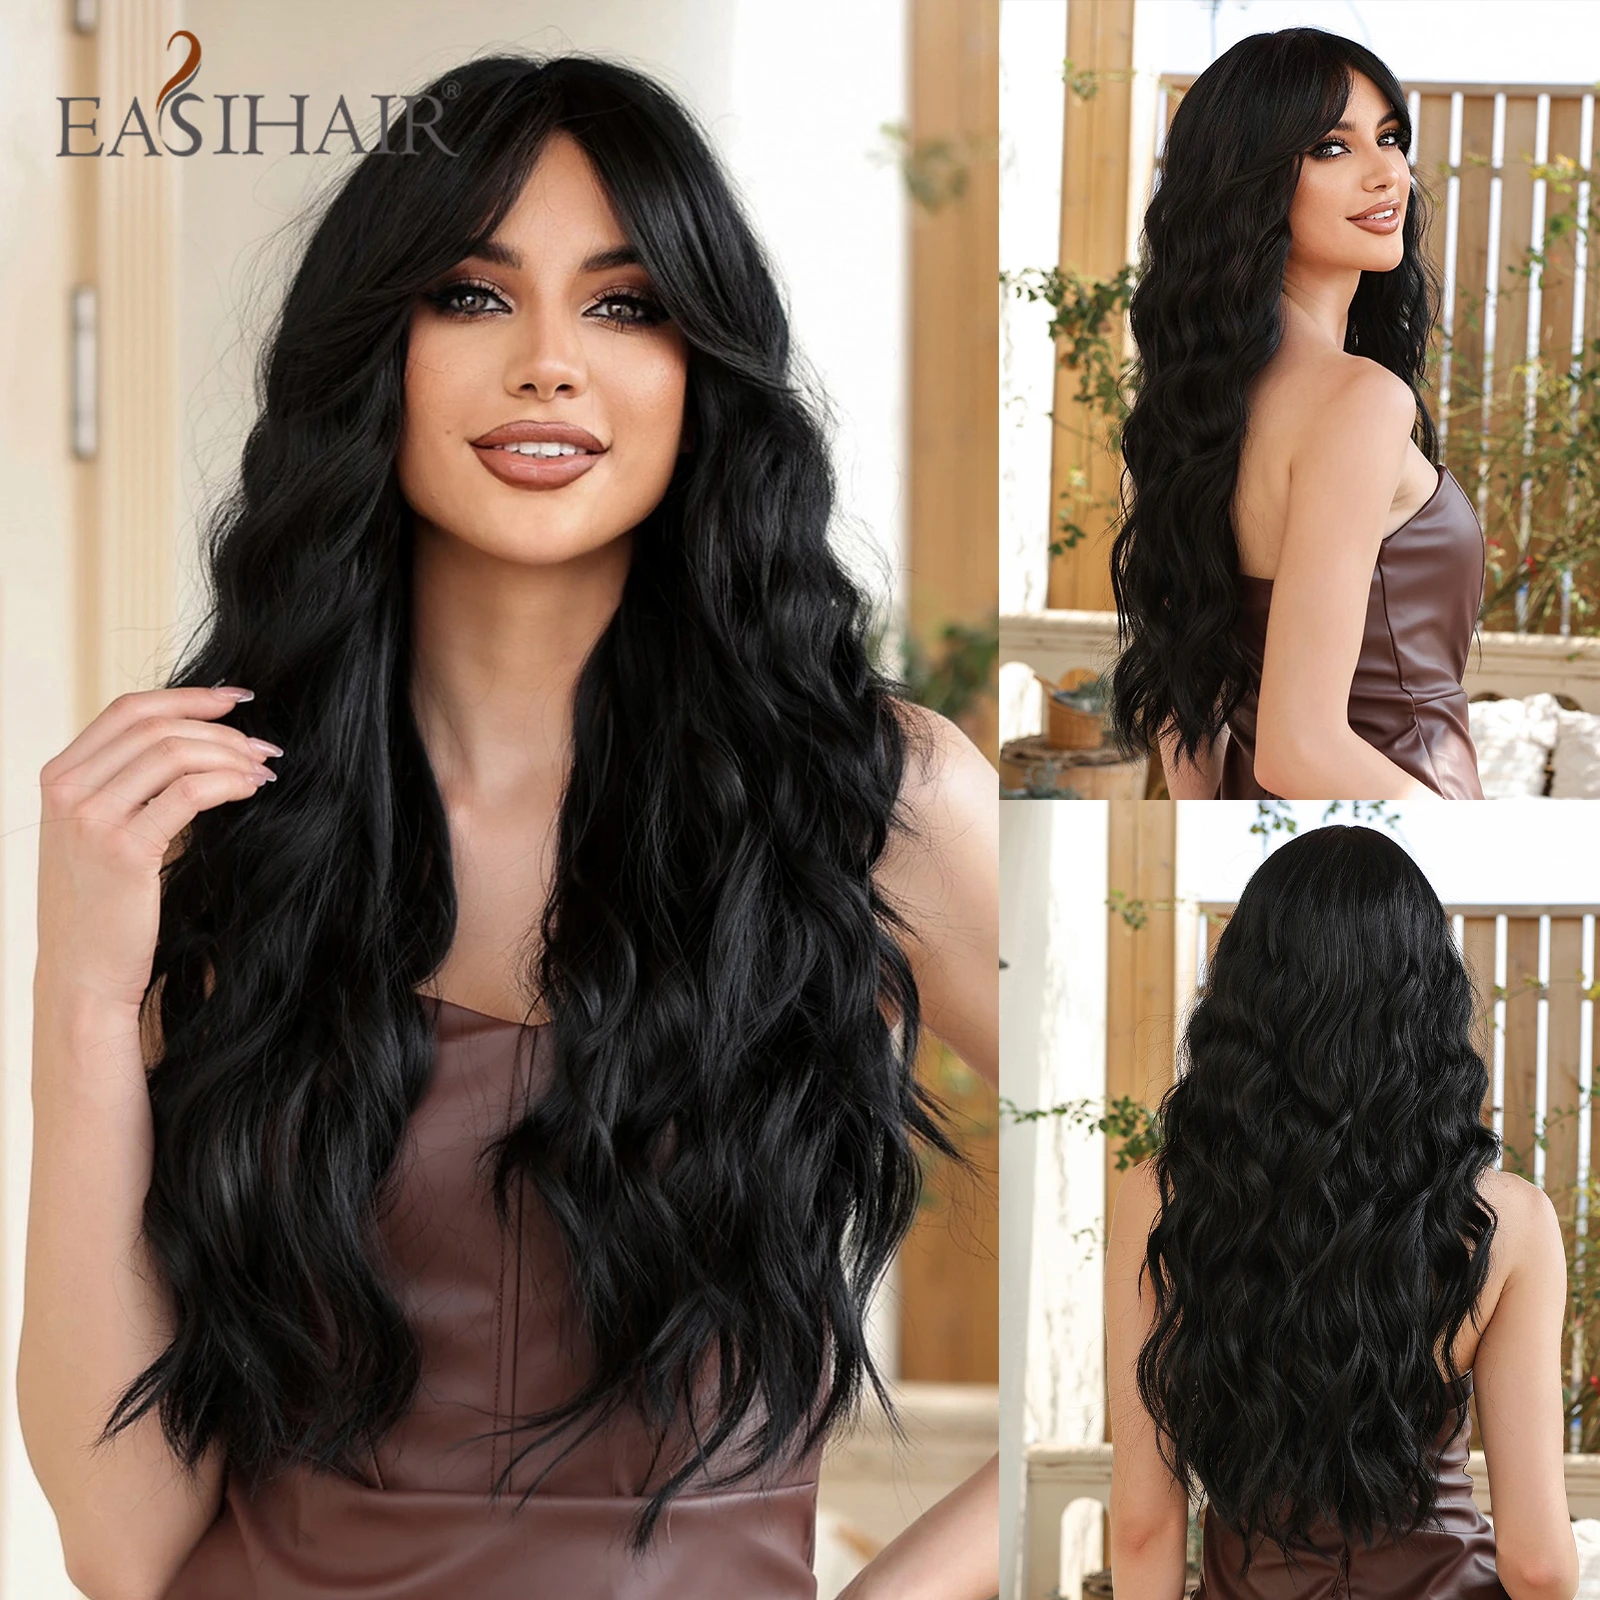 

EASIHAIR Black Long Curly Wave Synthetic Wigs with Long Bang for Afro Women Daily Cosplay Party Natural Heat Resistant Fake Hair